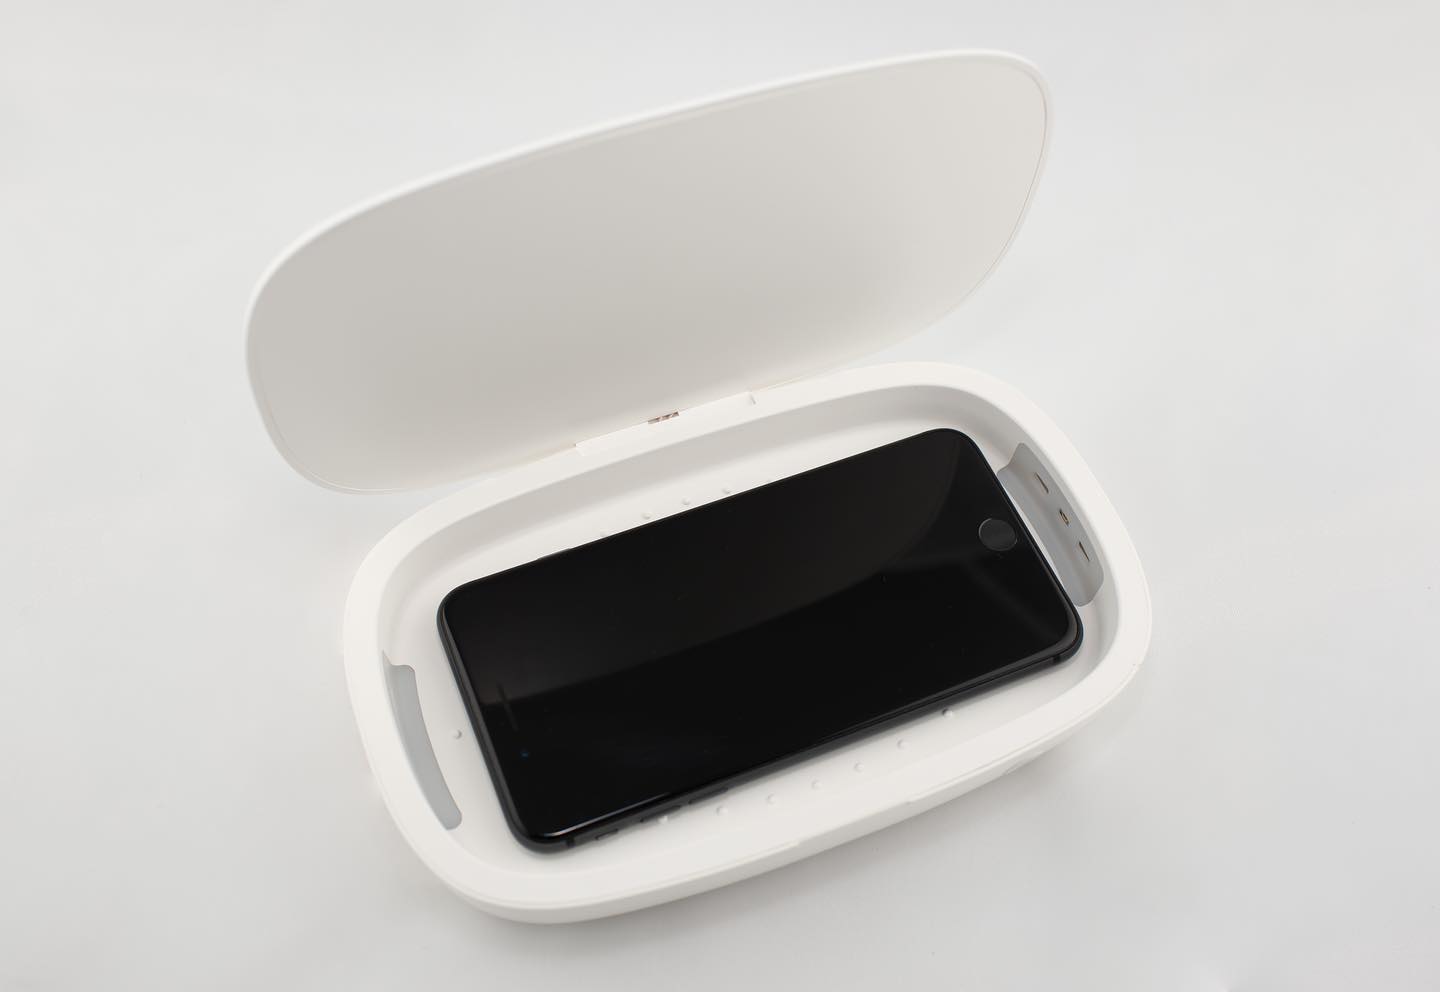 Purecellcase Launches UV-C Light Sanitizer to Disinfect Most-Used Personal Items